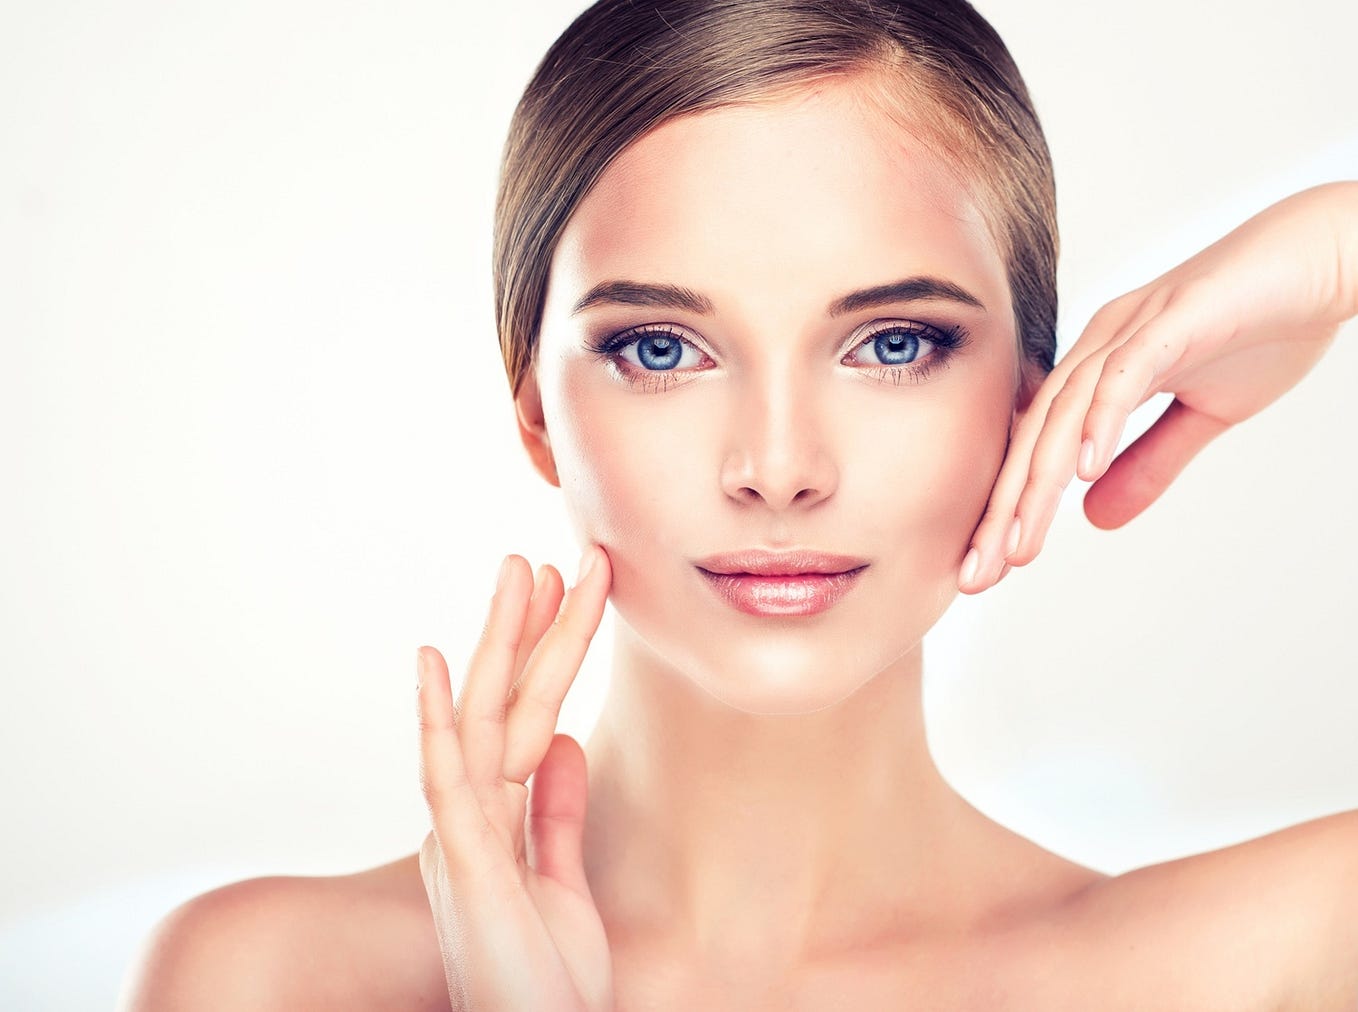 Skin Tightening: What You Need to Know